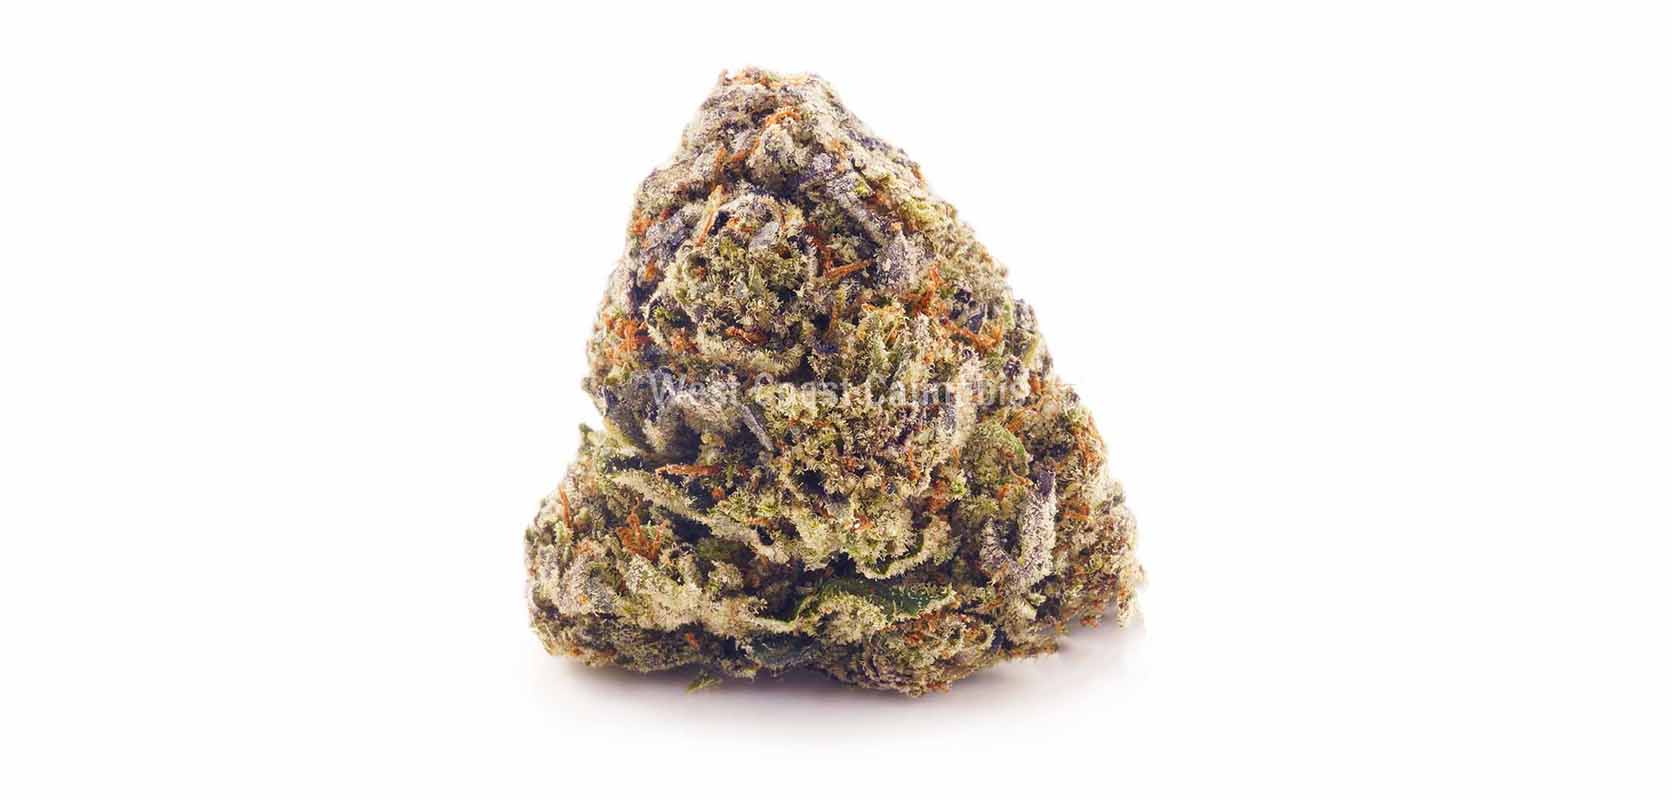 cheap canna budget buds from an online dispensary in Toronto for mail order marijuana, value buds, gummys, and THC edibles.